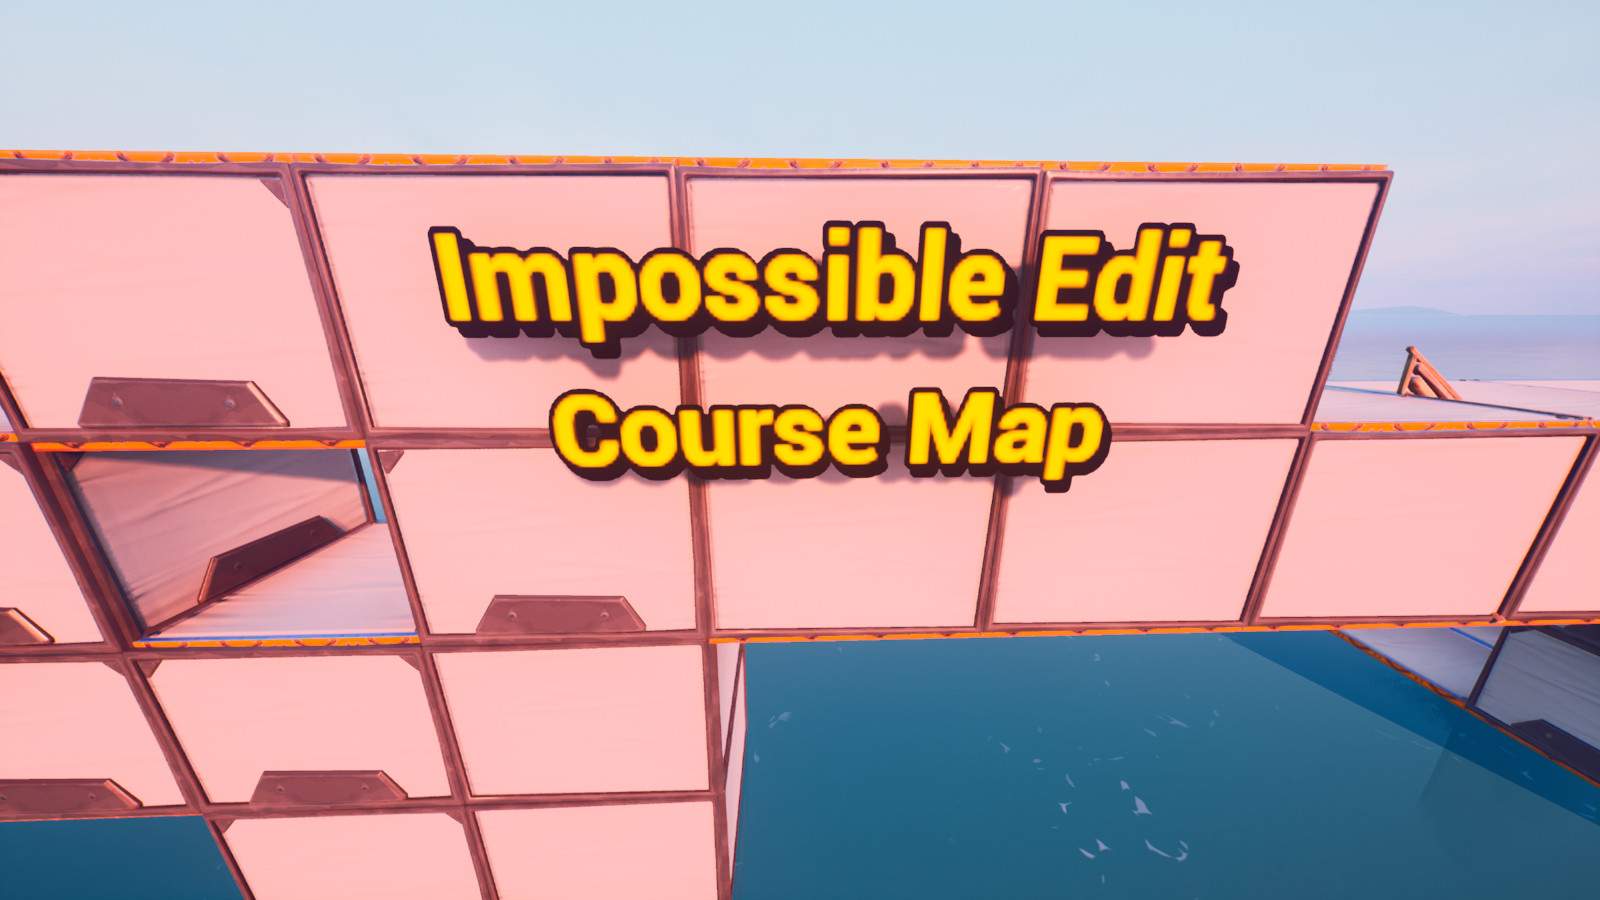 IMPOSSIBLE EDIT COURSE MAP